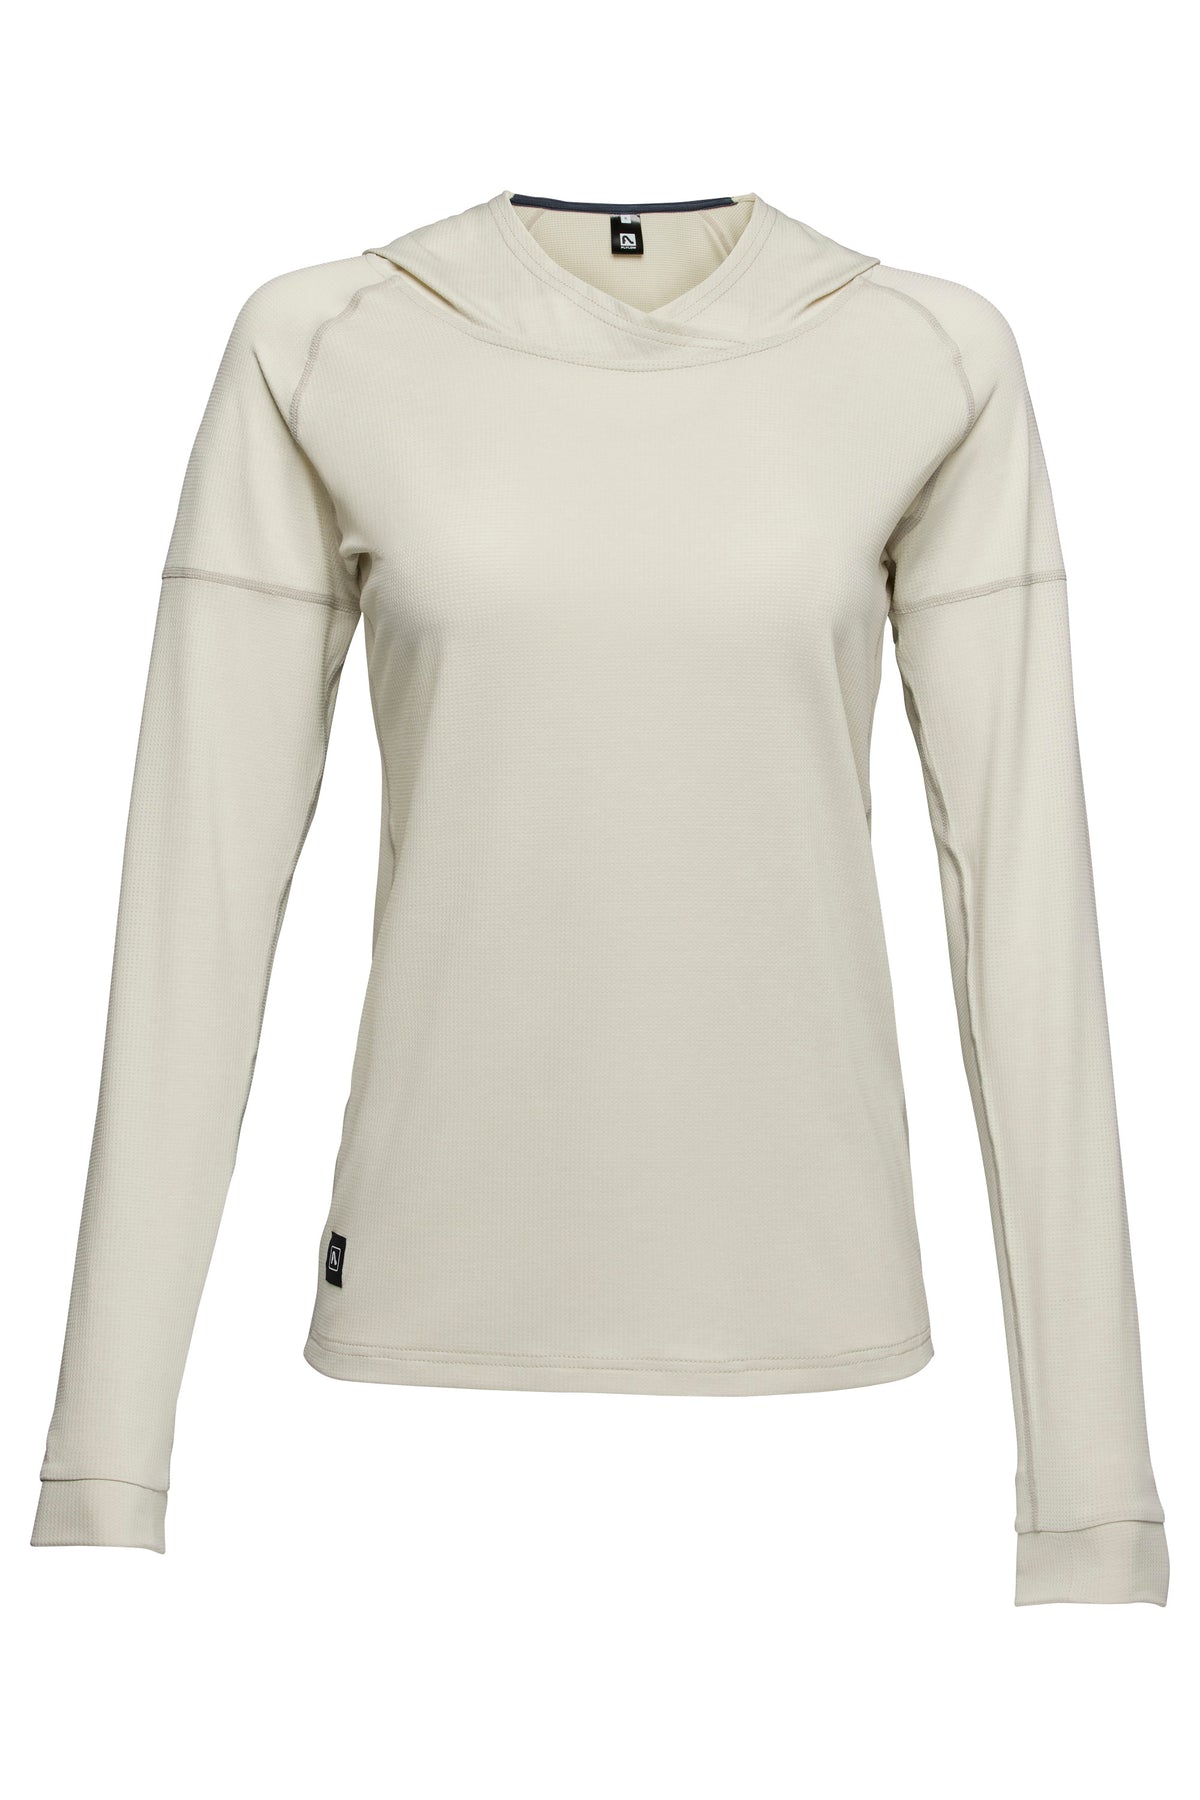 FlyLow Women's Moonlight Shirt | Tools For Trails